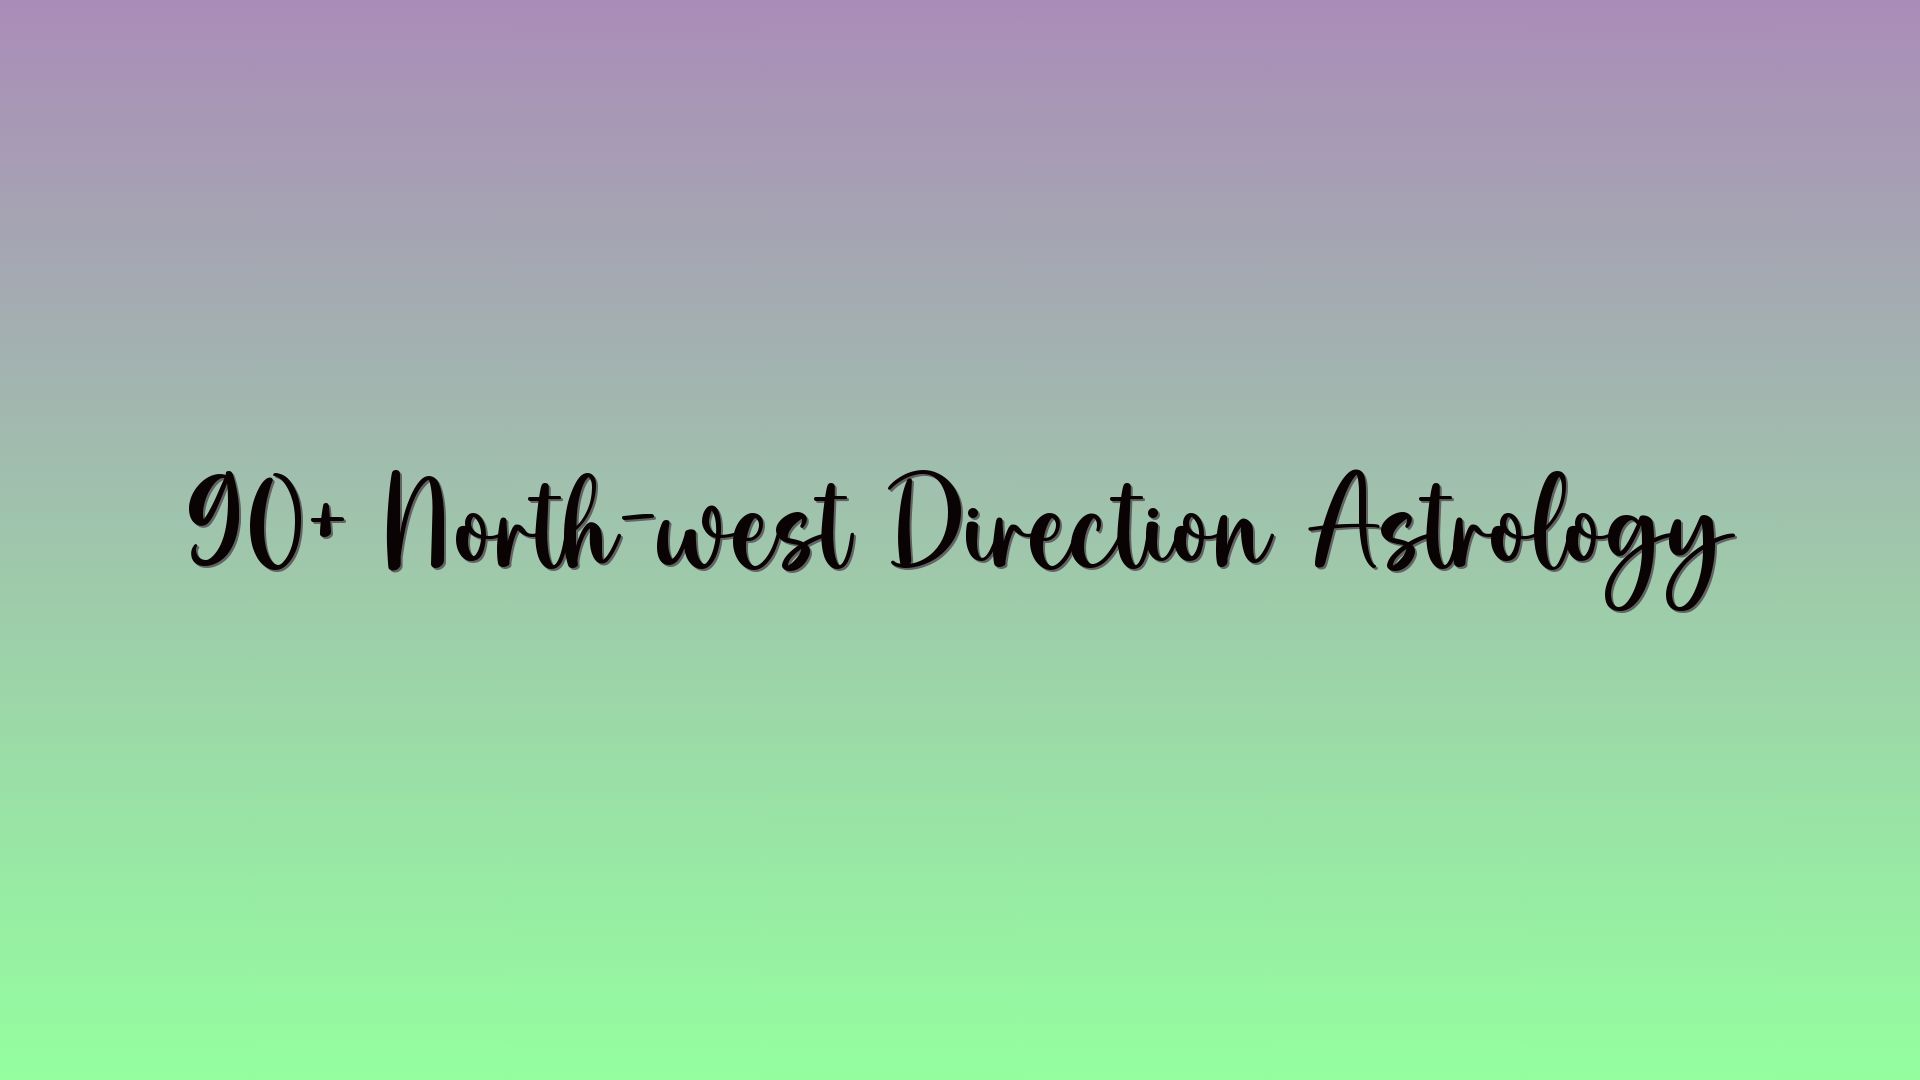 90+ North-west Direction Astrology